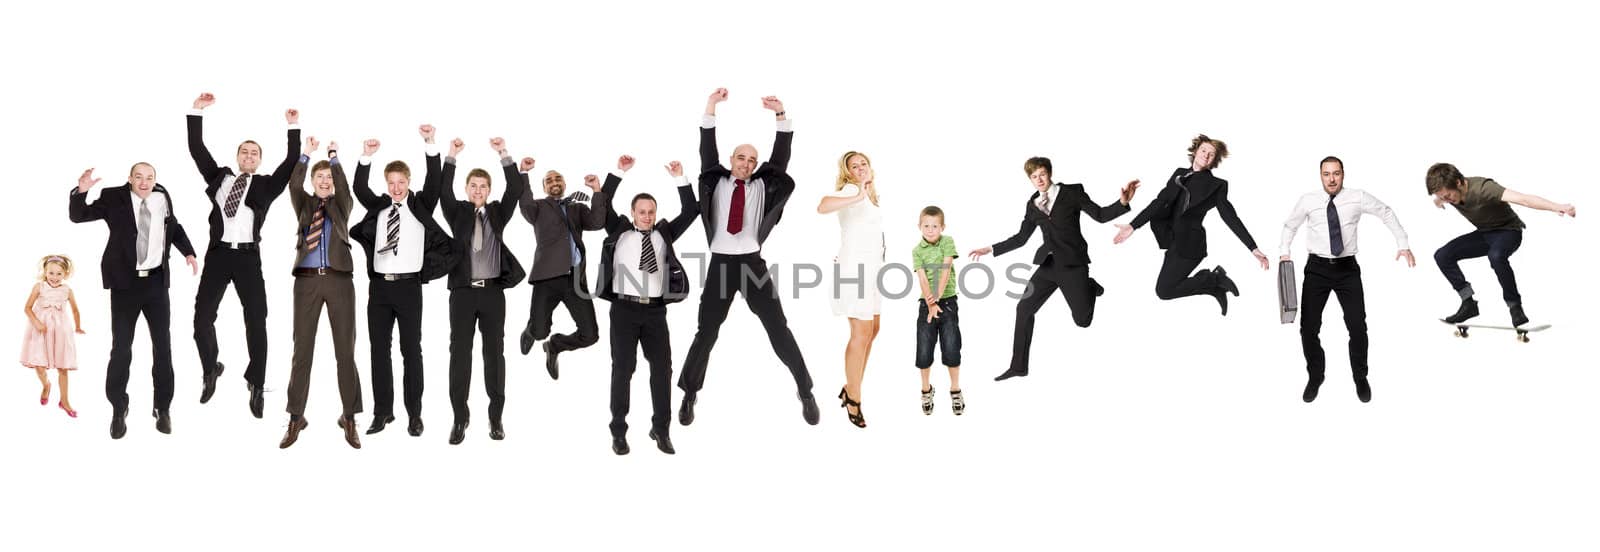 Group of Jumping People isolated on white Background